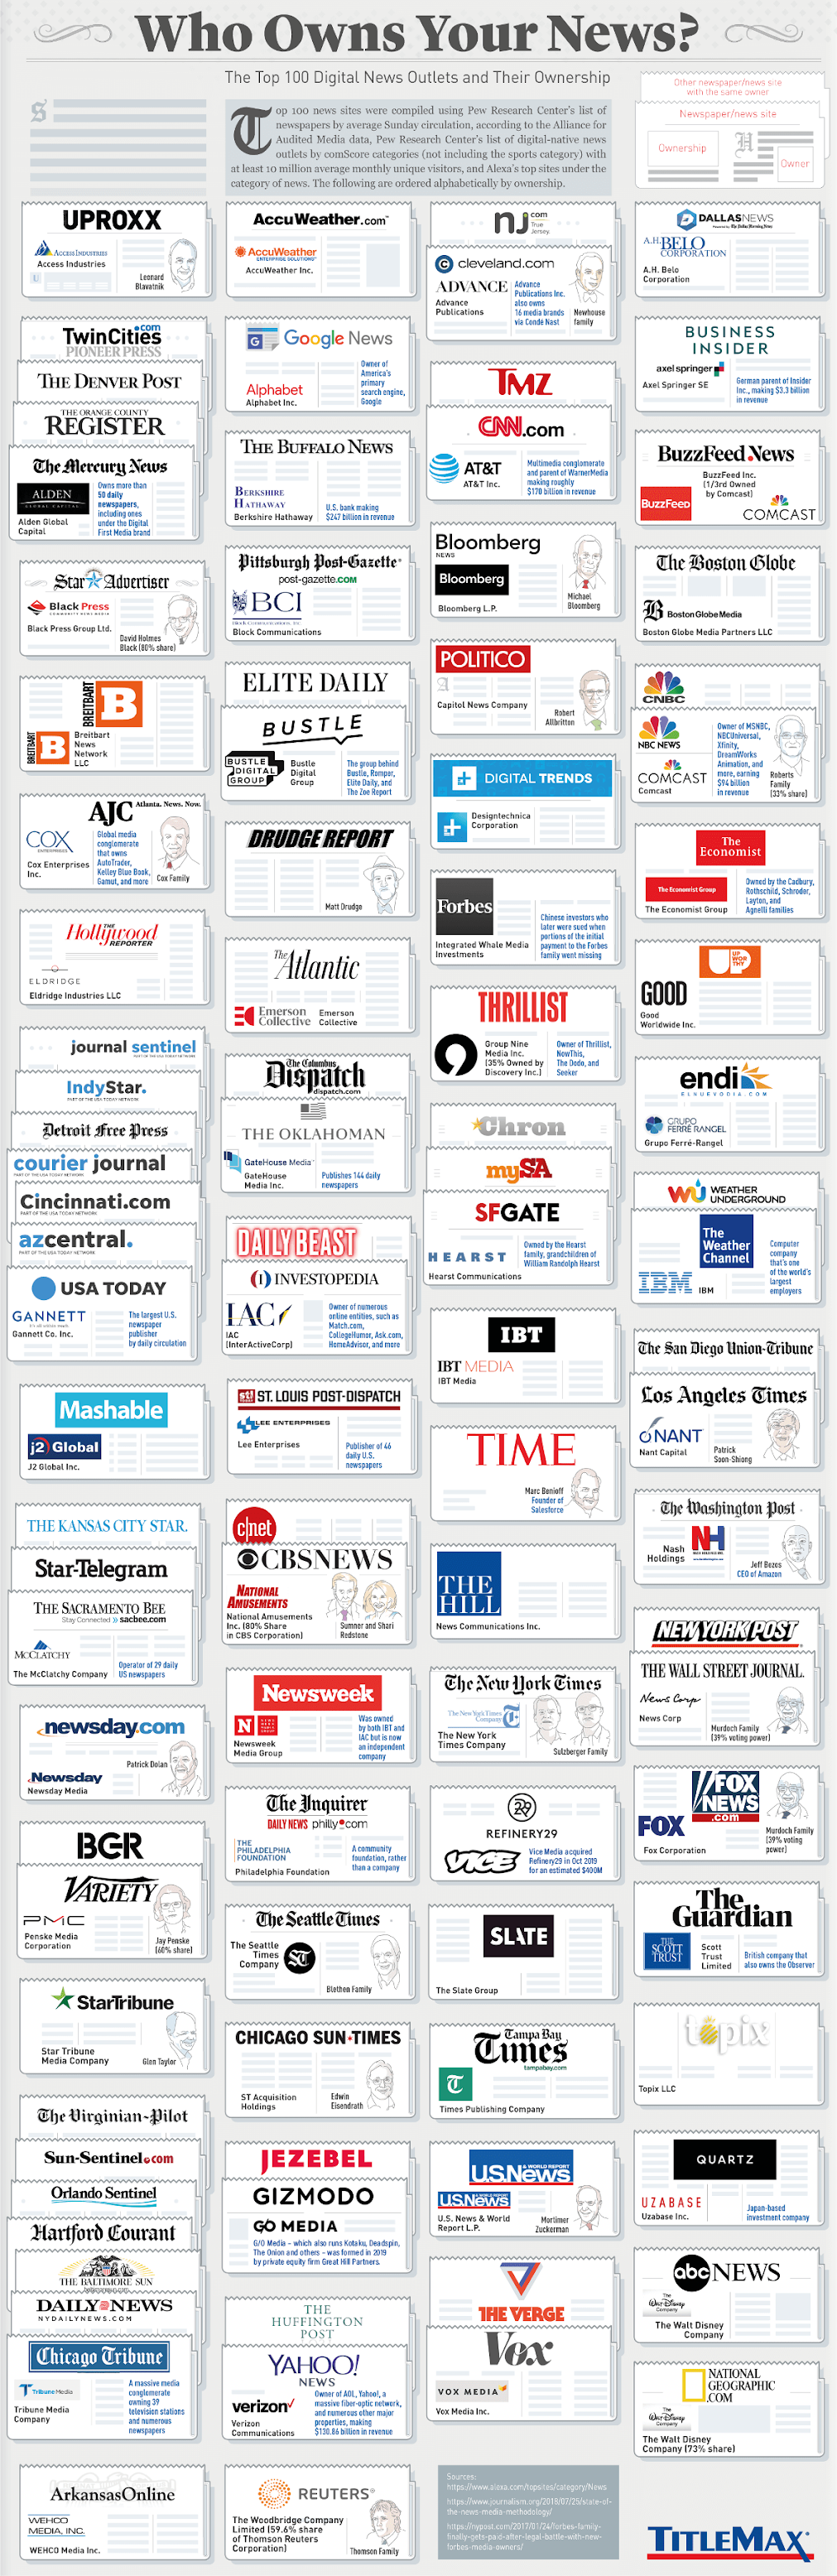 WHO OWNS THE NEWS: A CLOSER LOOK AT ONLINE NEWS SOURCES #infographic